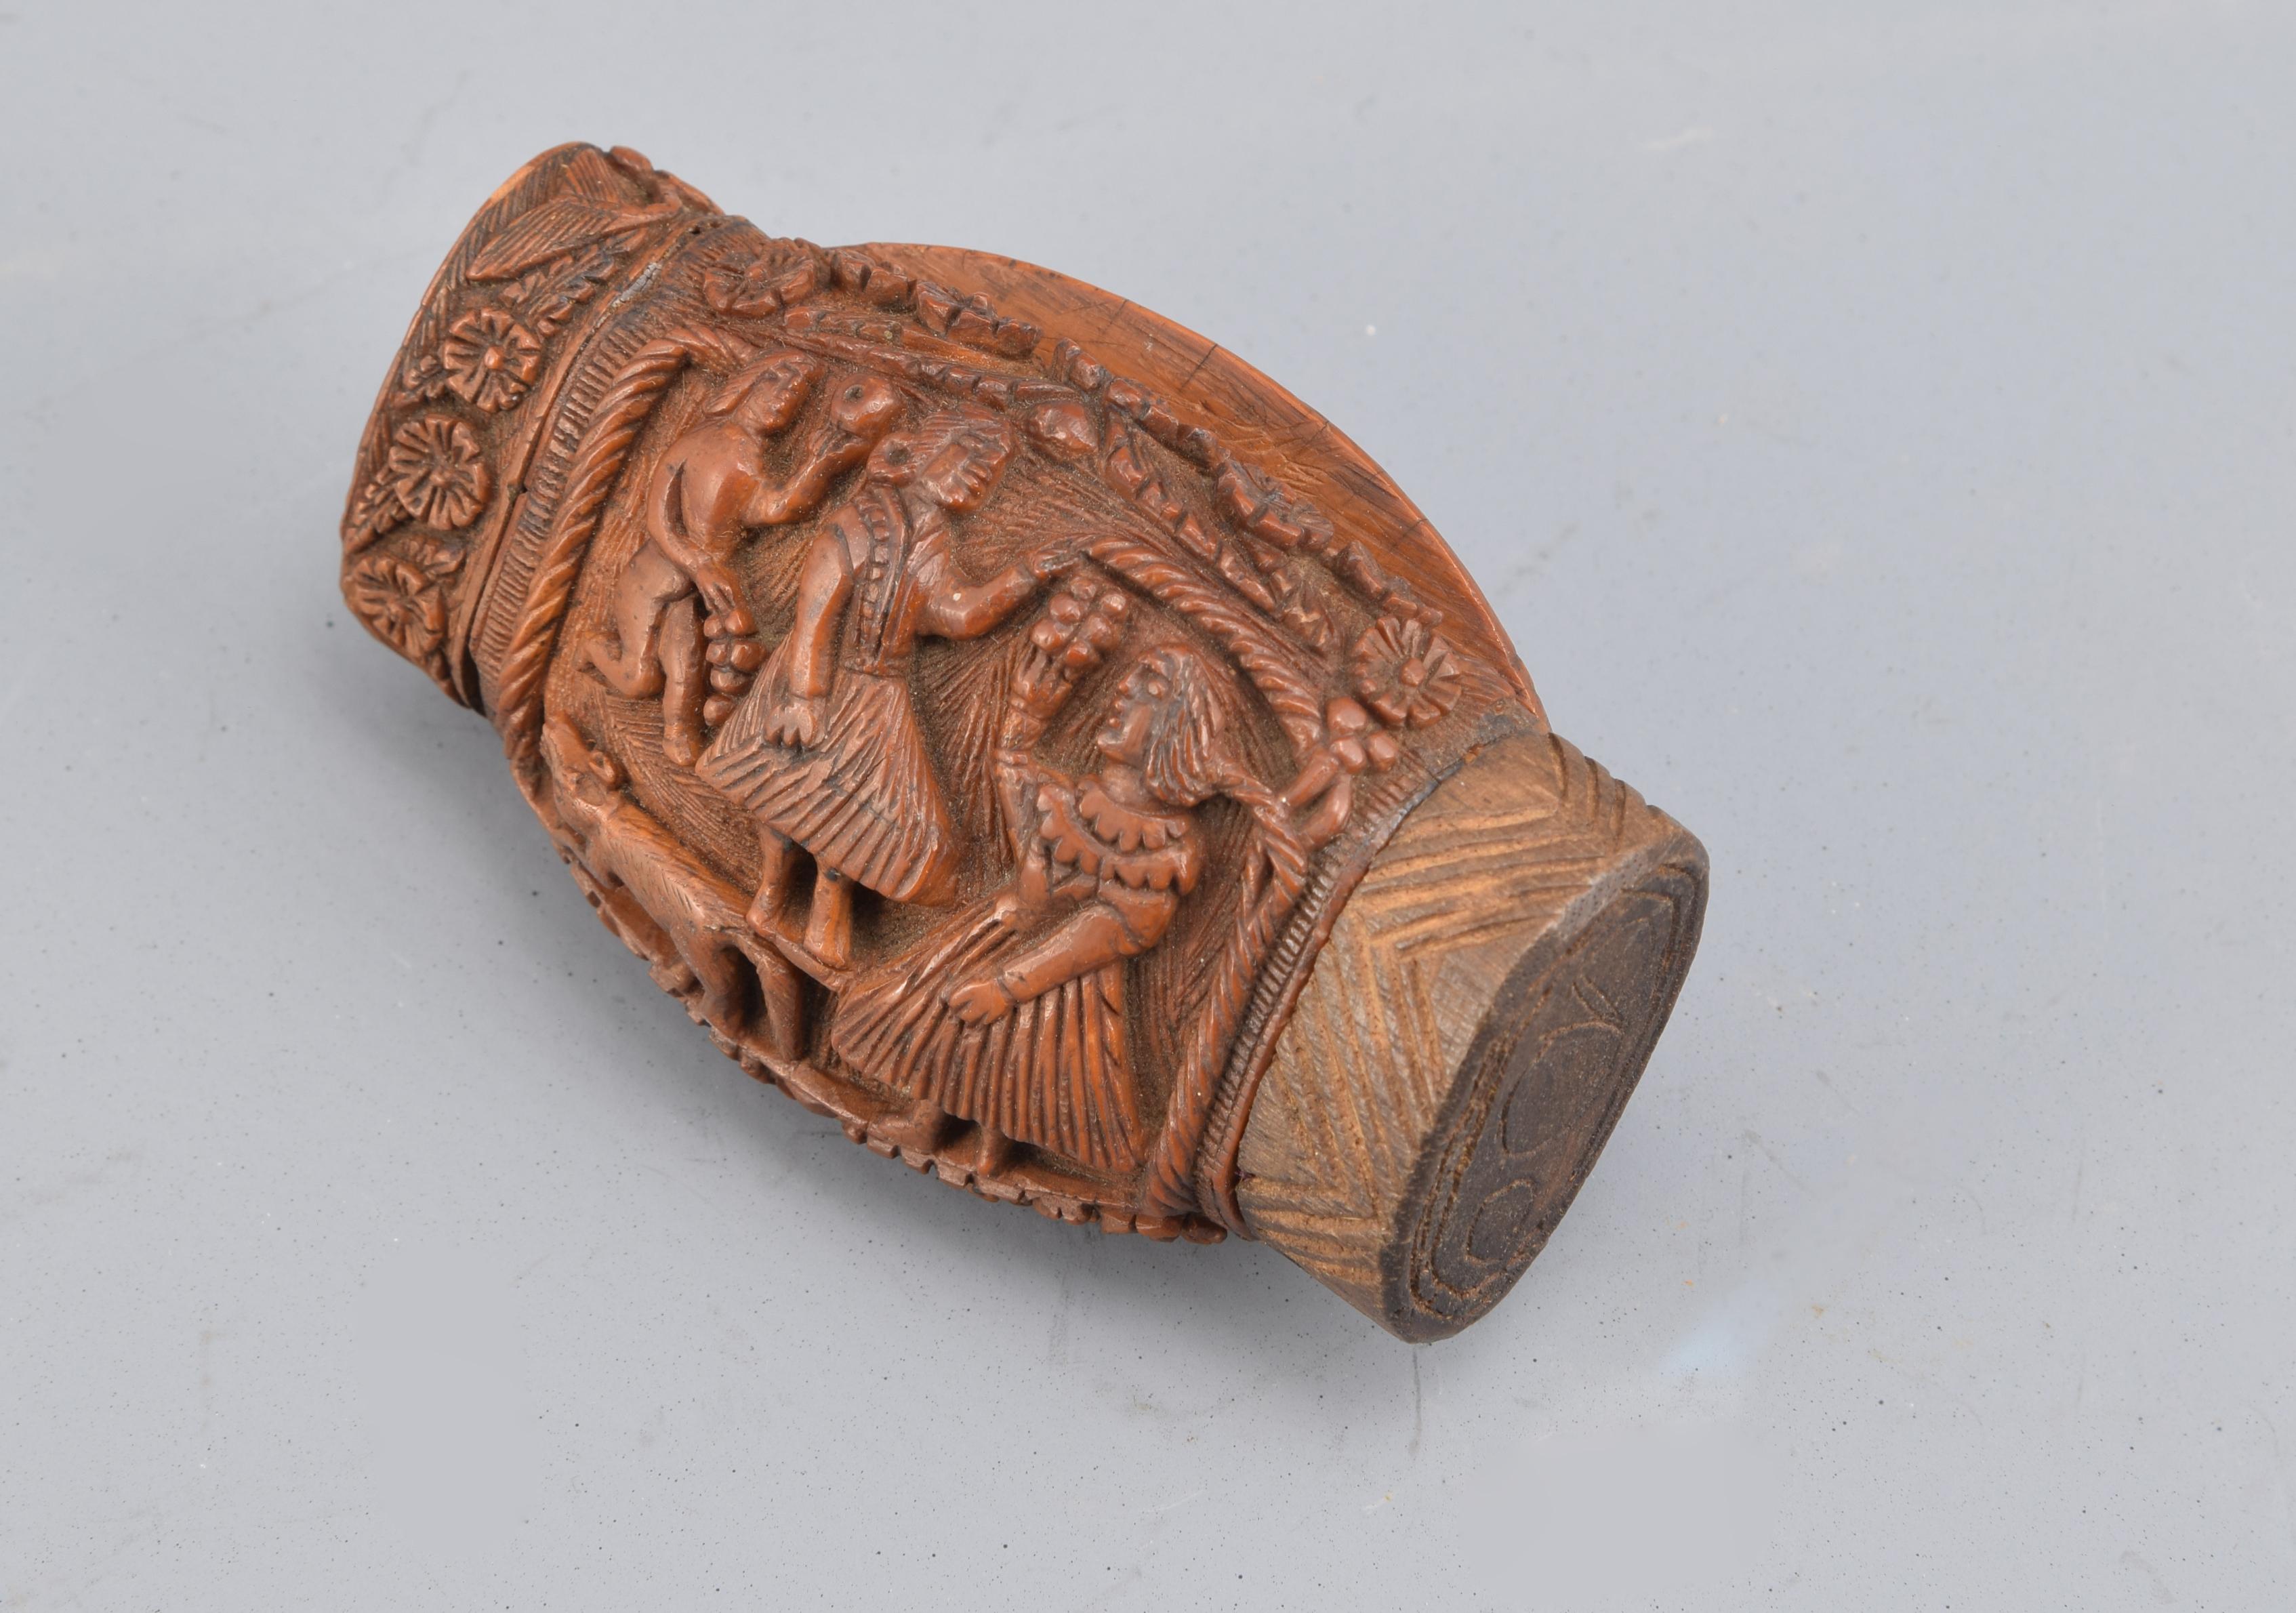 Tobacco box. Carved wood, 19th century.
Carved wooden box with metal hinged lid decorated on the outside with carved vegetal, figurative (animals and characters) and geometric elements. On the one hand, you can see a pastoral scene, and on the